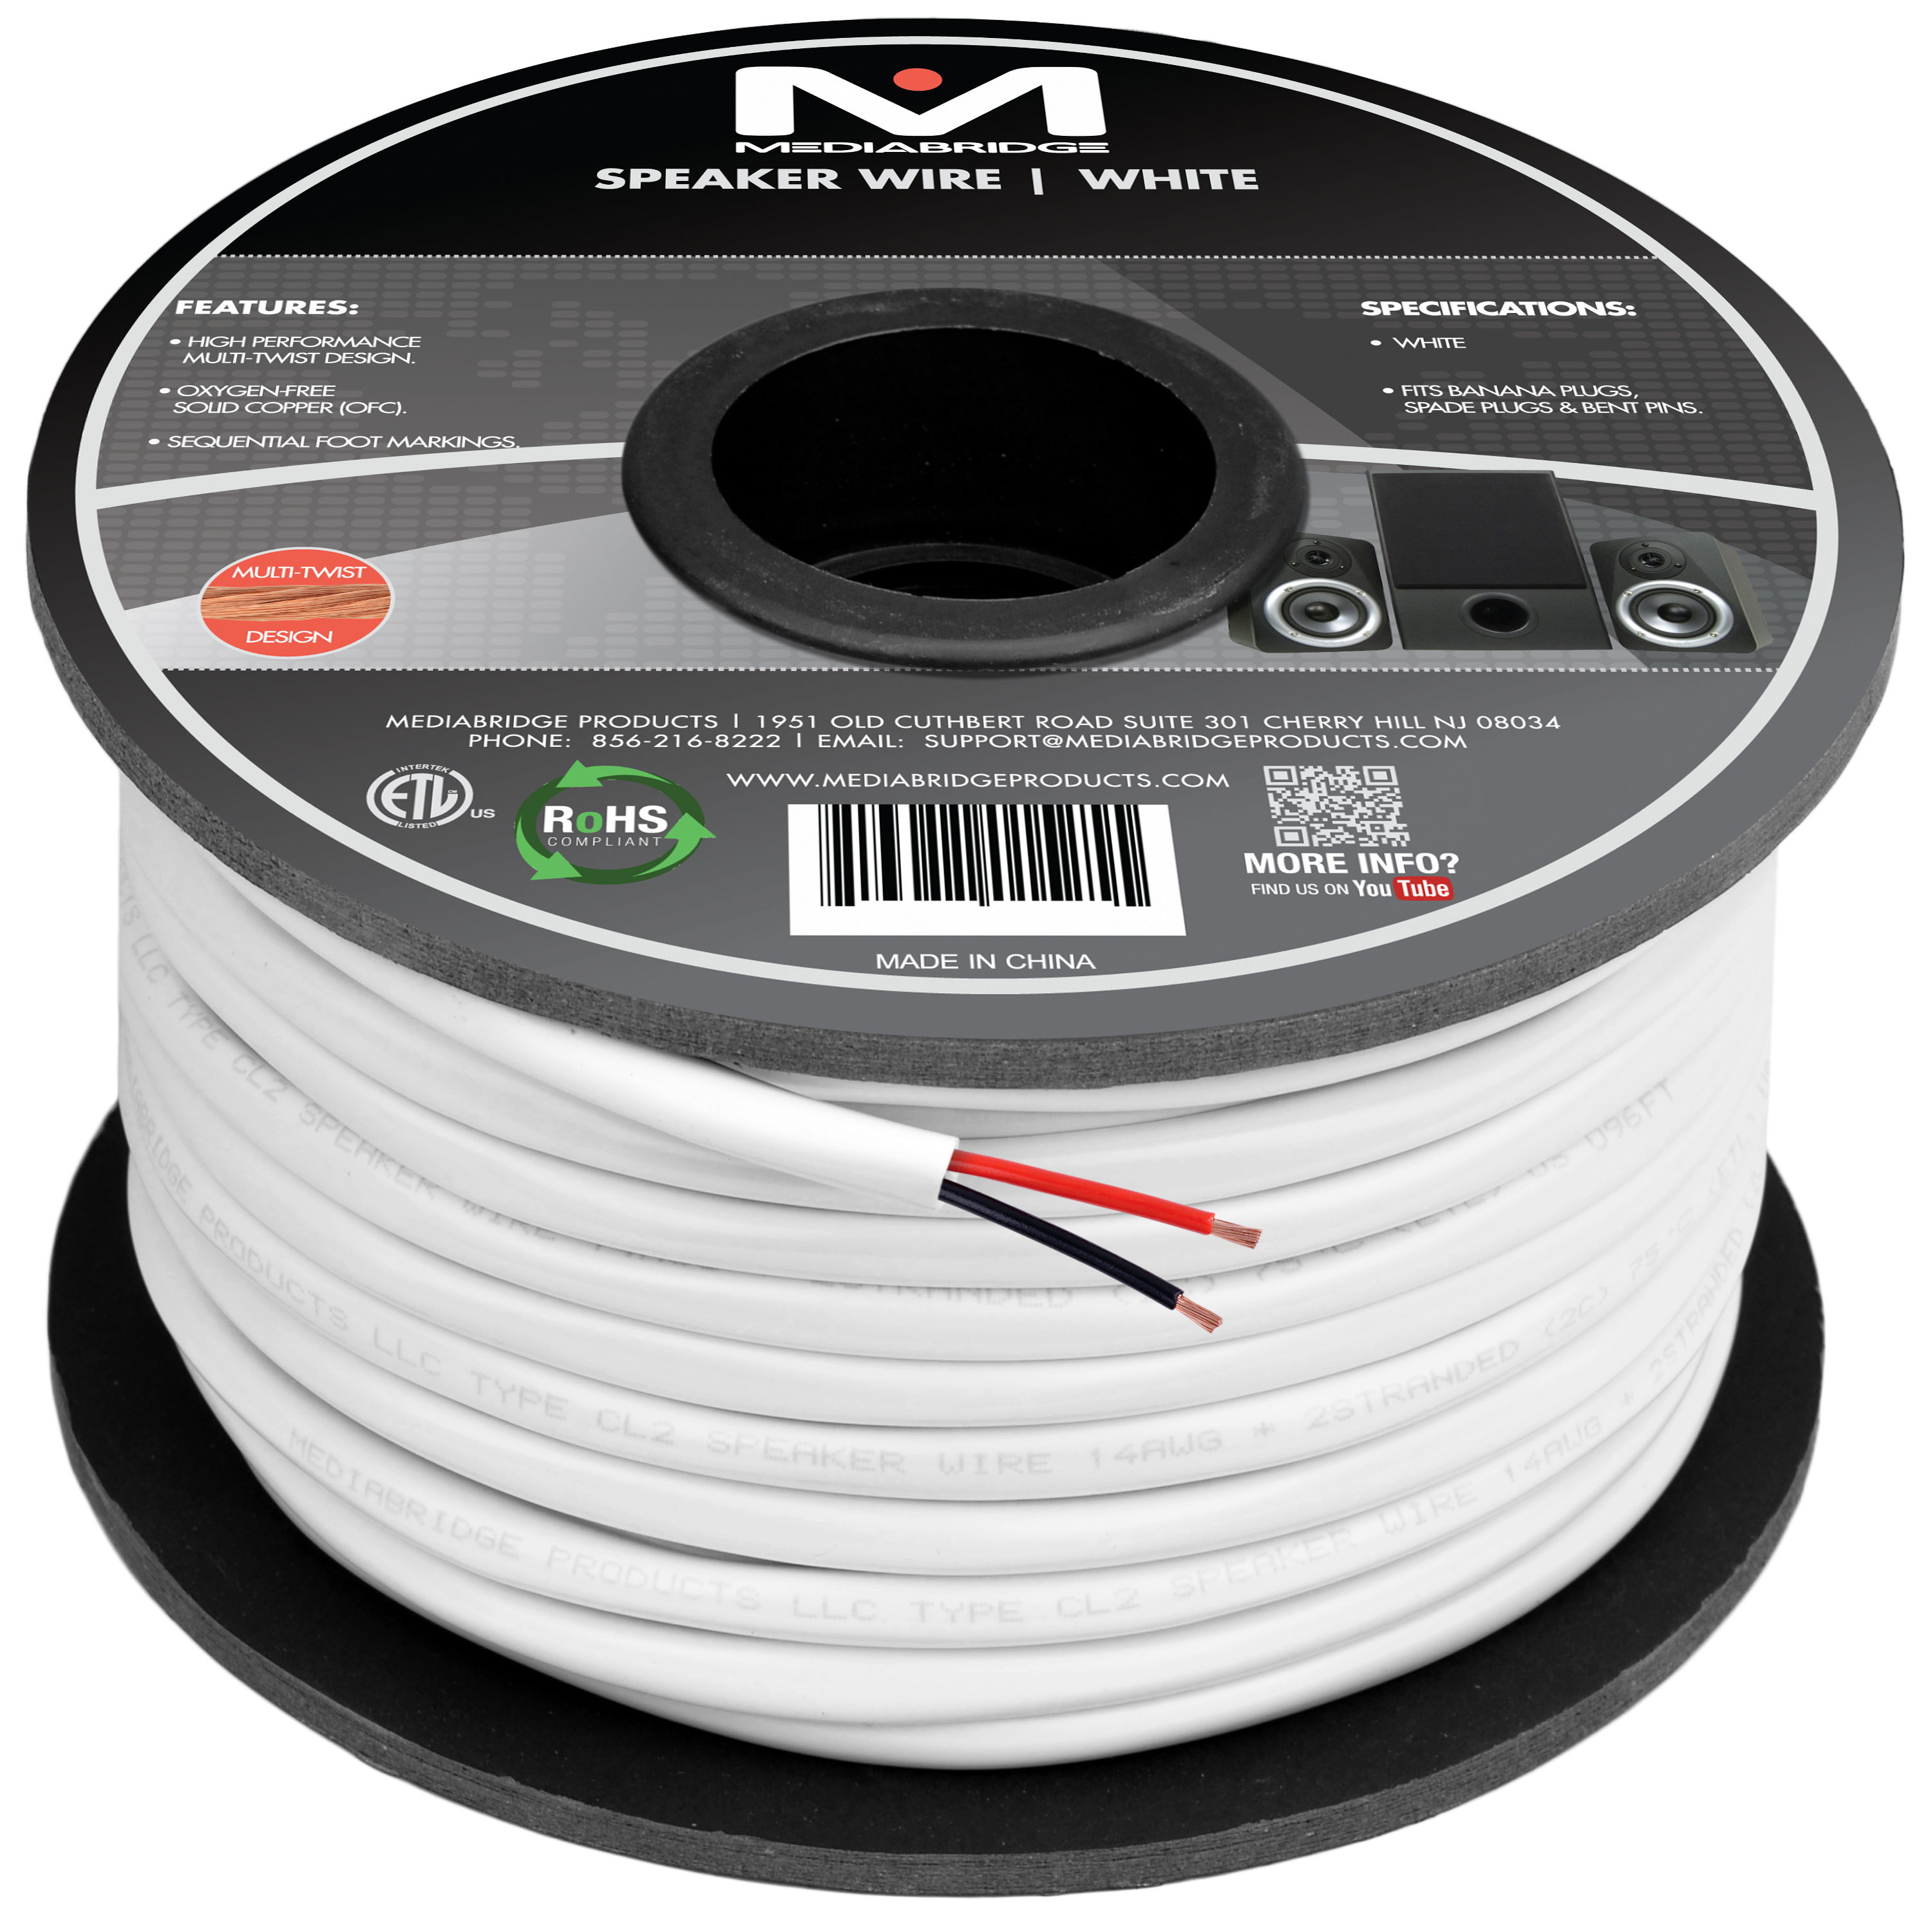 Mediabridge 14AWG 2-Conductor Speaker Wire (100 Feet, White) - 99.9% Oxygen Free Copper - ETL Listed CL2 Rated for In-Wall Use (Part# SW-14X2-100-WH ) - image 1 of 4